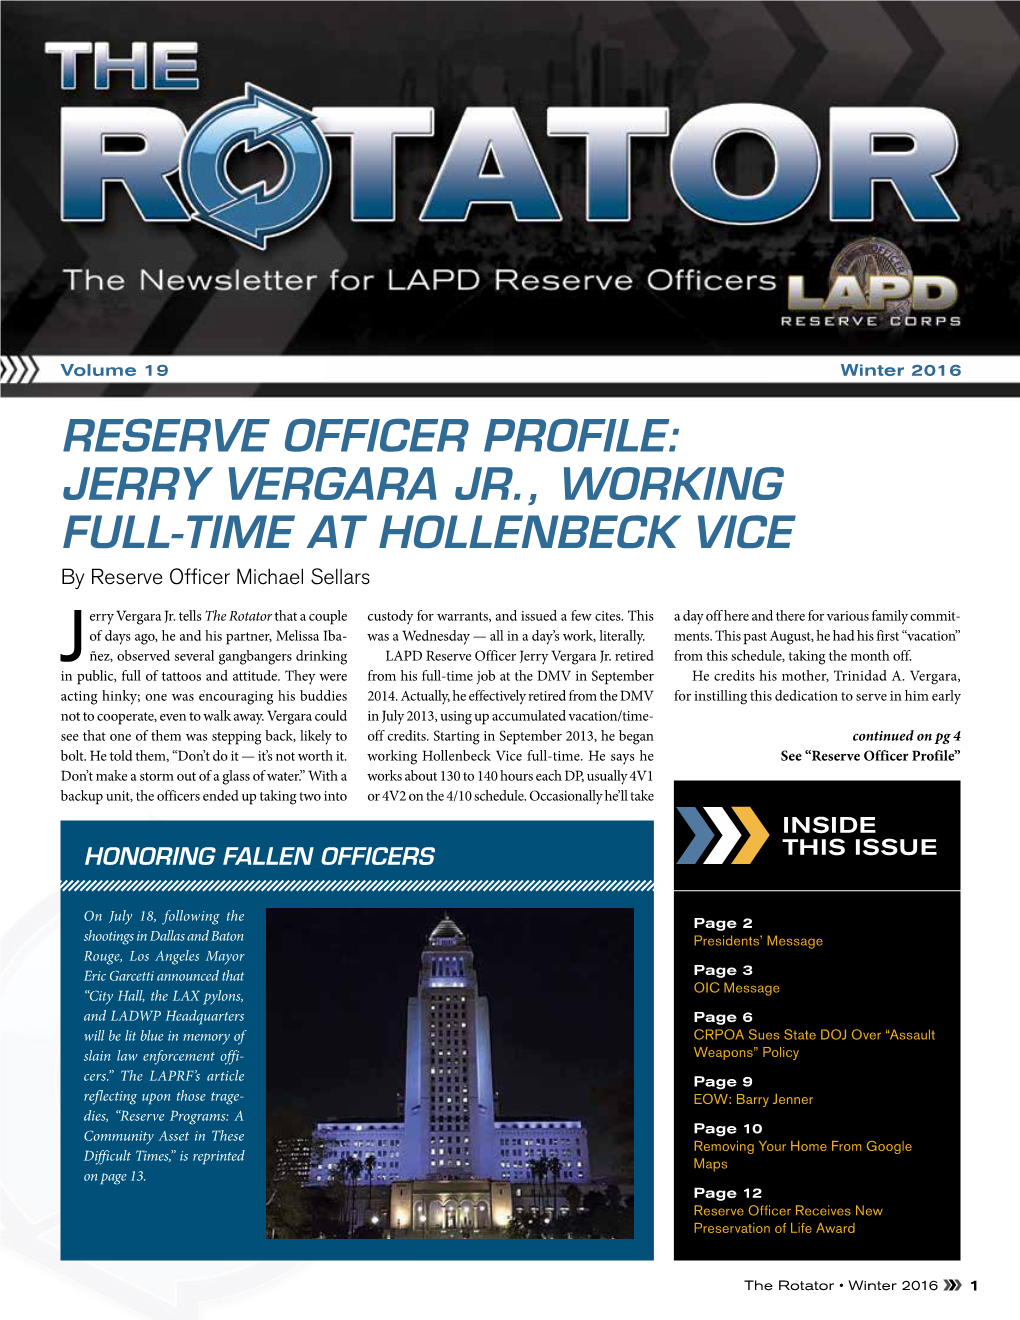 Winter 2016 RESERVE OFFICER PROFILE: JERRY VERGARA JR., WORKING FULL-TIME at HOLLENBECK VICE by Reserve Officer Michael Sellars